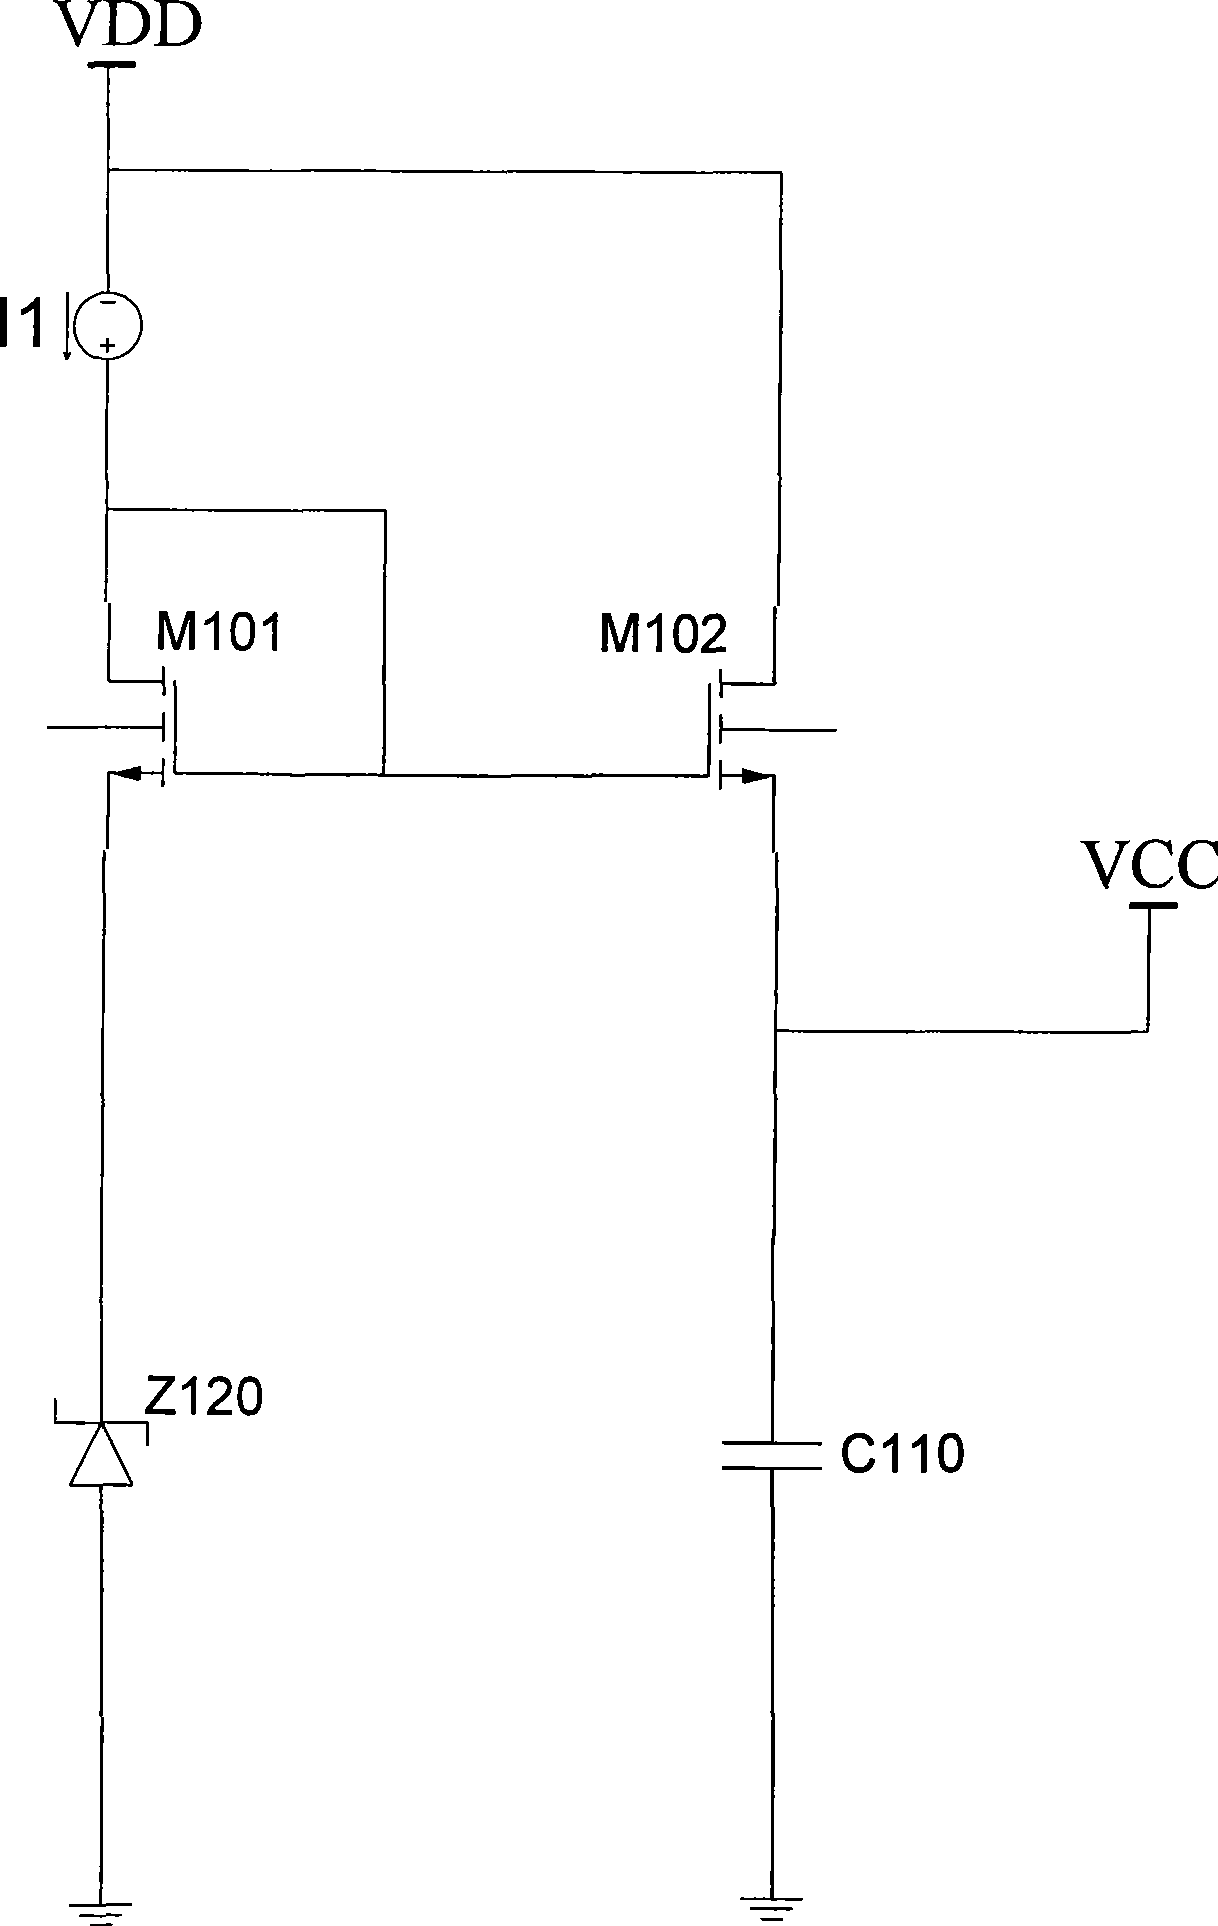 High and low voltage changeover circuit